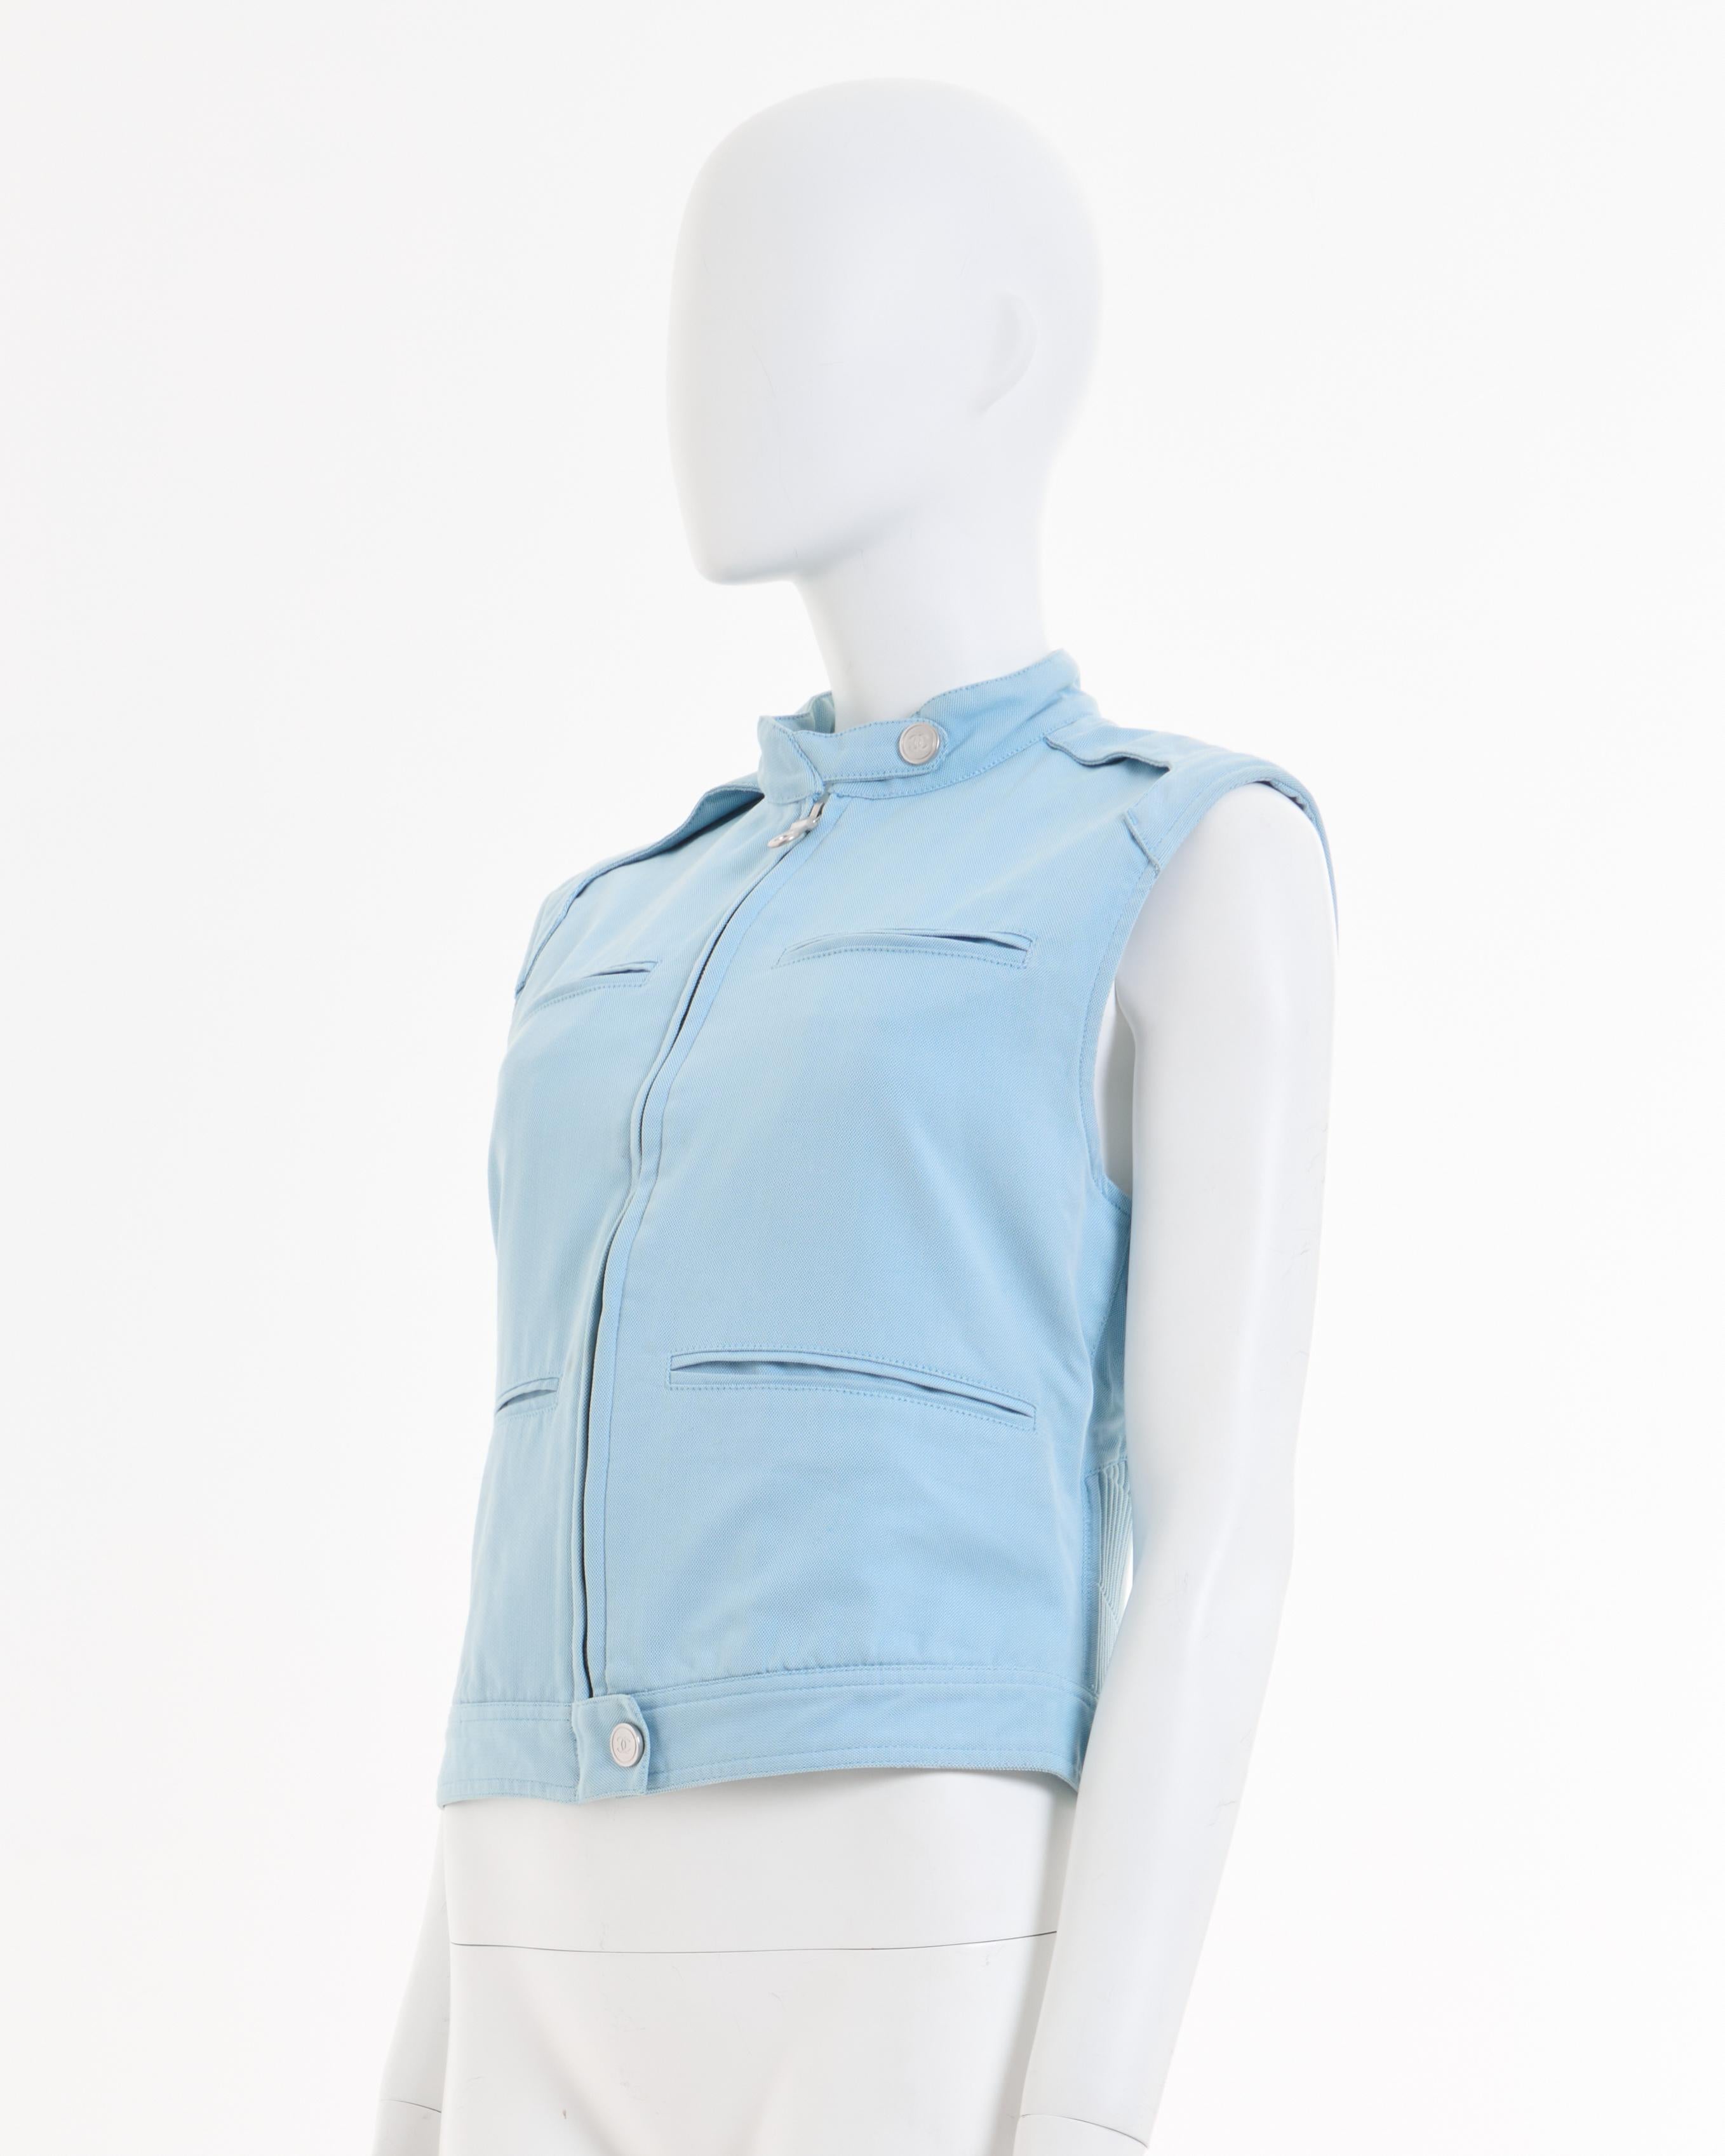 - Chanel light blue motorcycle vest 
- Sold by Skof.Archive
- Designed by Karl Lagerfeld
- Spring-Summer 2002 
- Derriere sport collection 
- Frontal zipper closure with metal snap buttons with CC logo engraved 
- Sleeveless 
- Back red embroidery